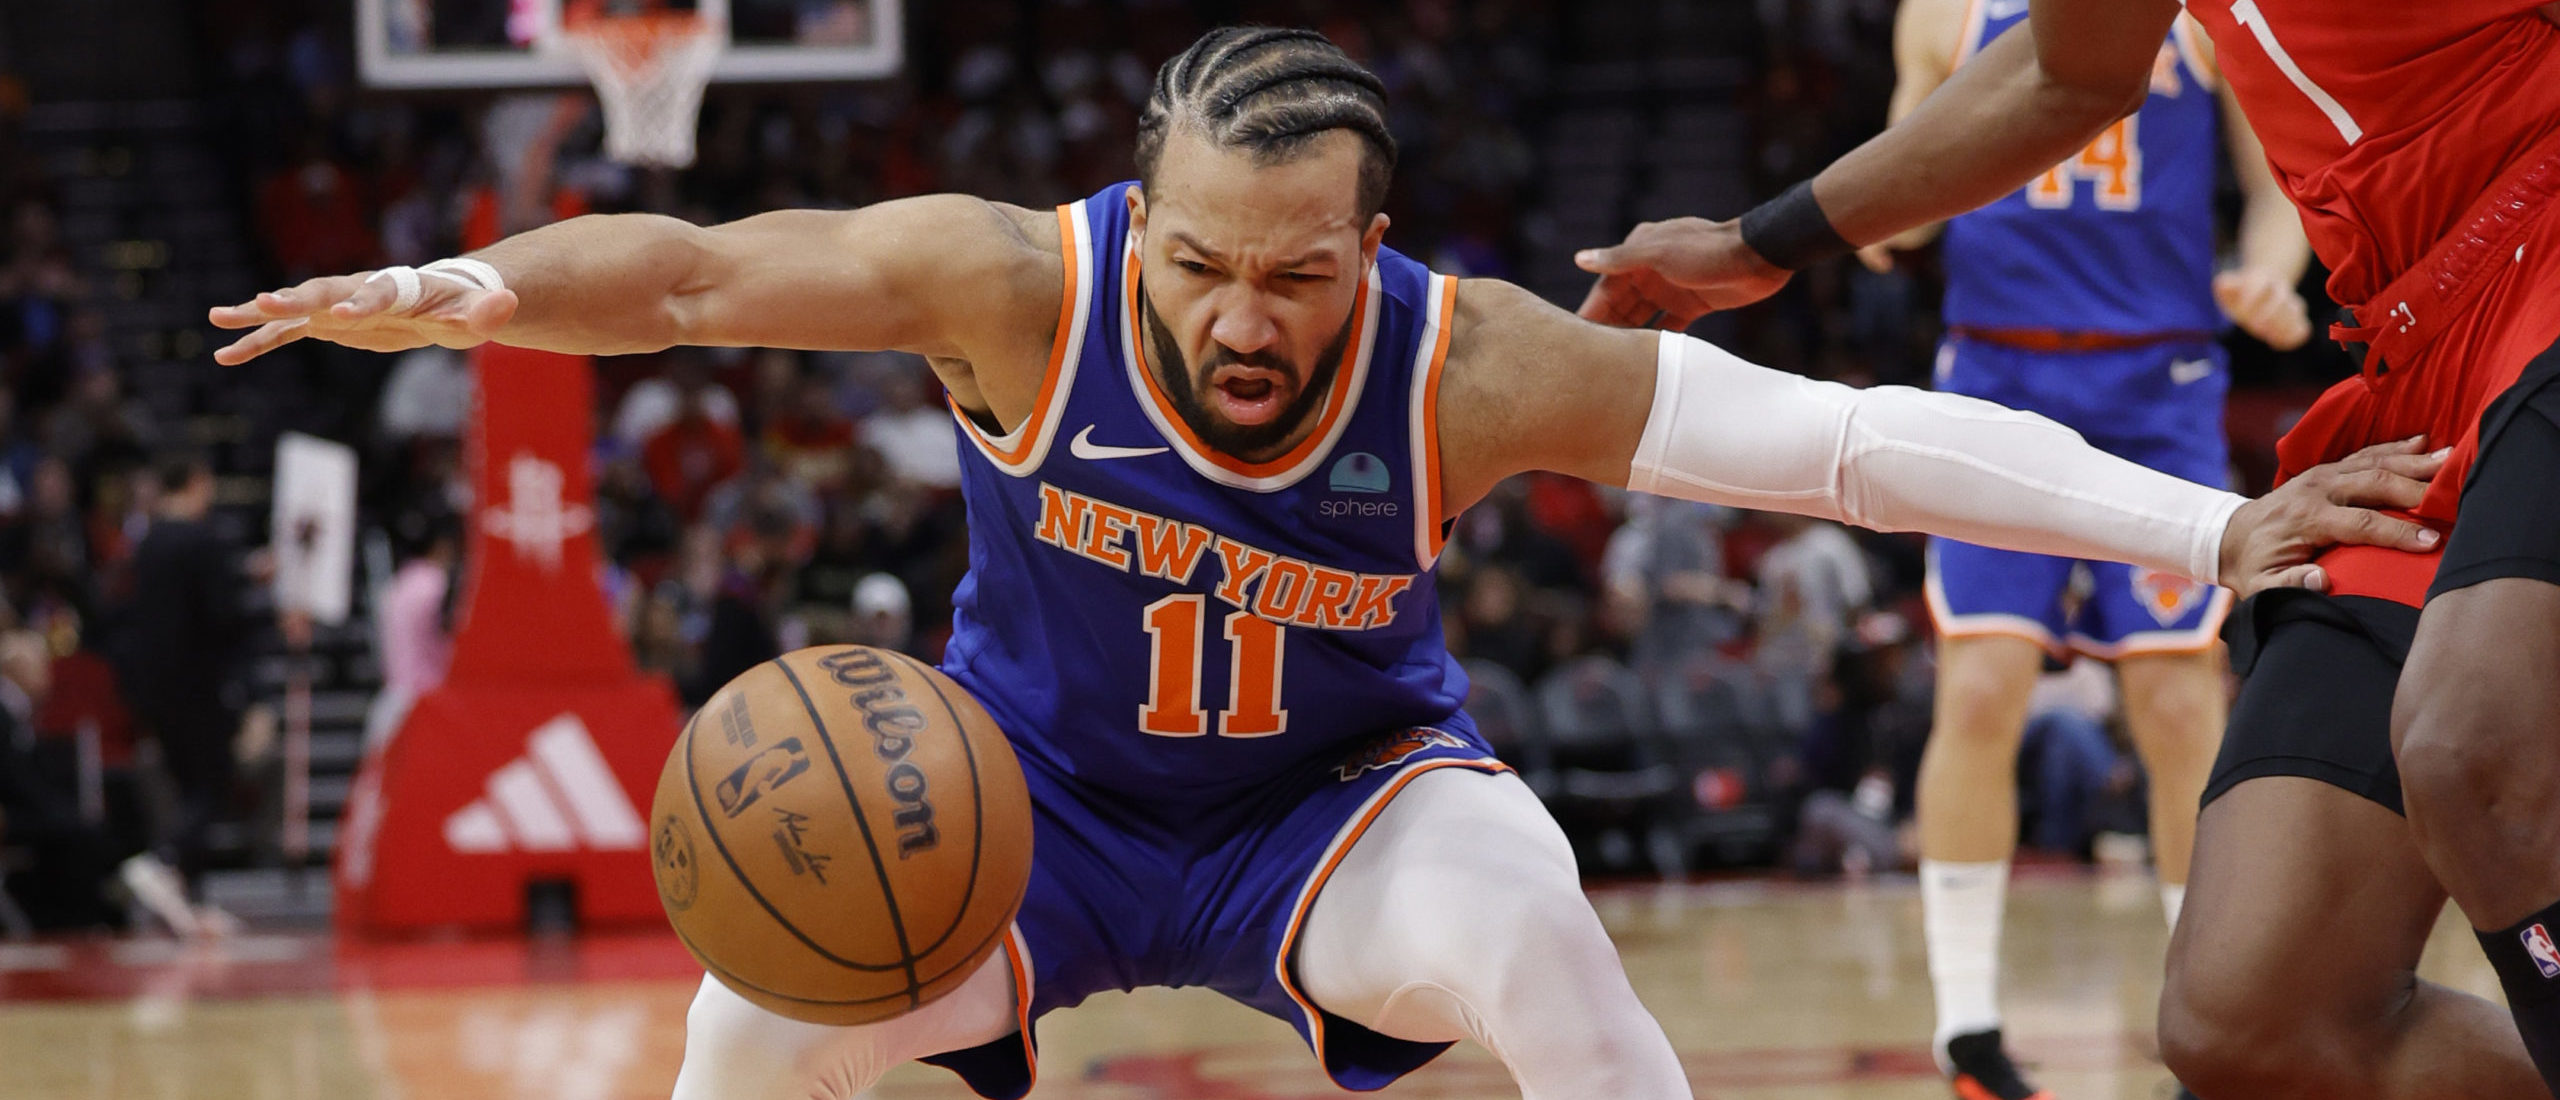 NBA Ref Admits Screwing Up Call That Cost New York Knicks A Big Win: Too Little, Too Late